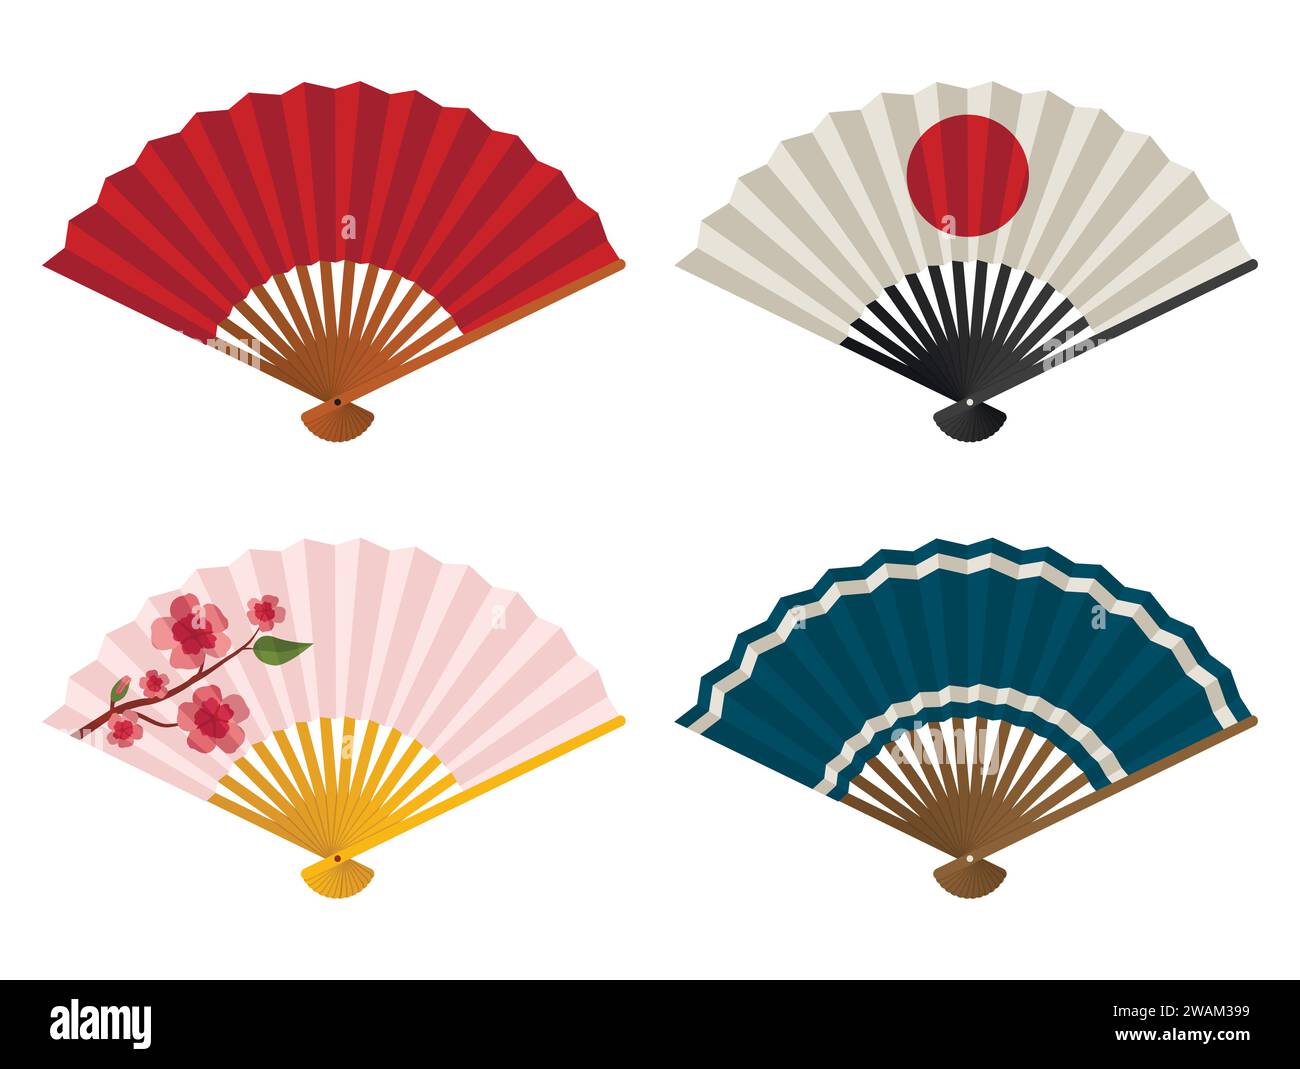 Hand fans set isolated on white background, Japanese and Chinese folding fan, Traditional Asian paper geisha fan. Vector illustration Stock Vector